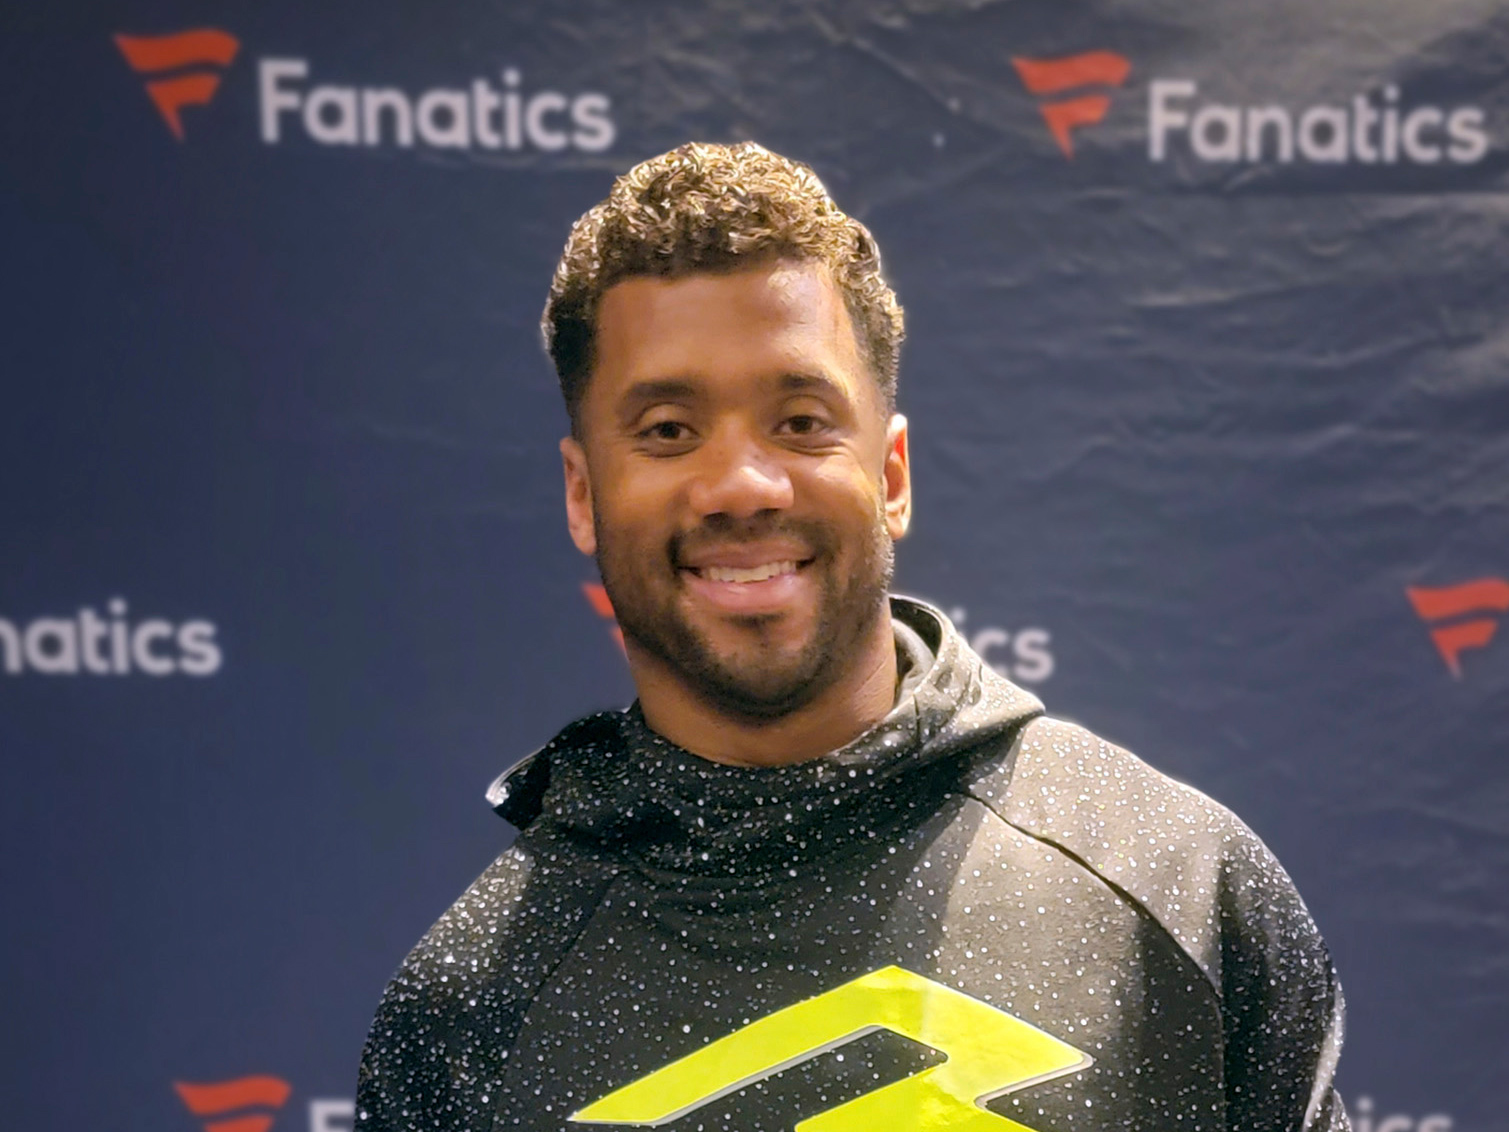 Superbowl Champion Quarterback Russell Wilson Signs Deal With Fanatics